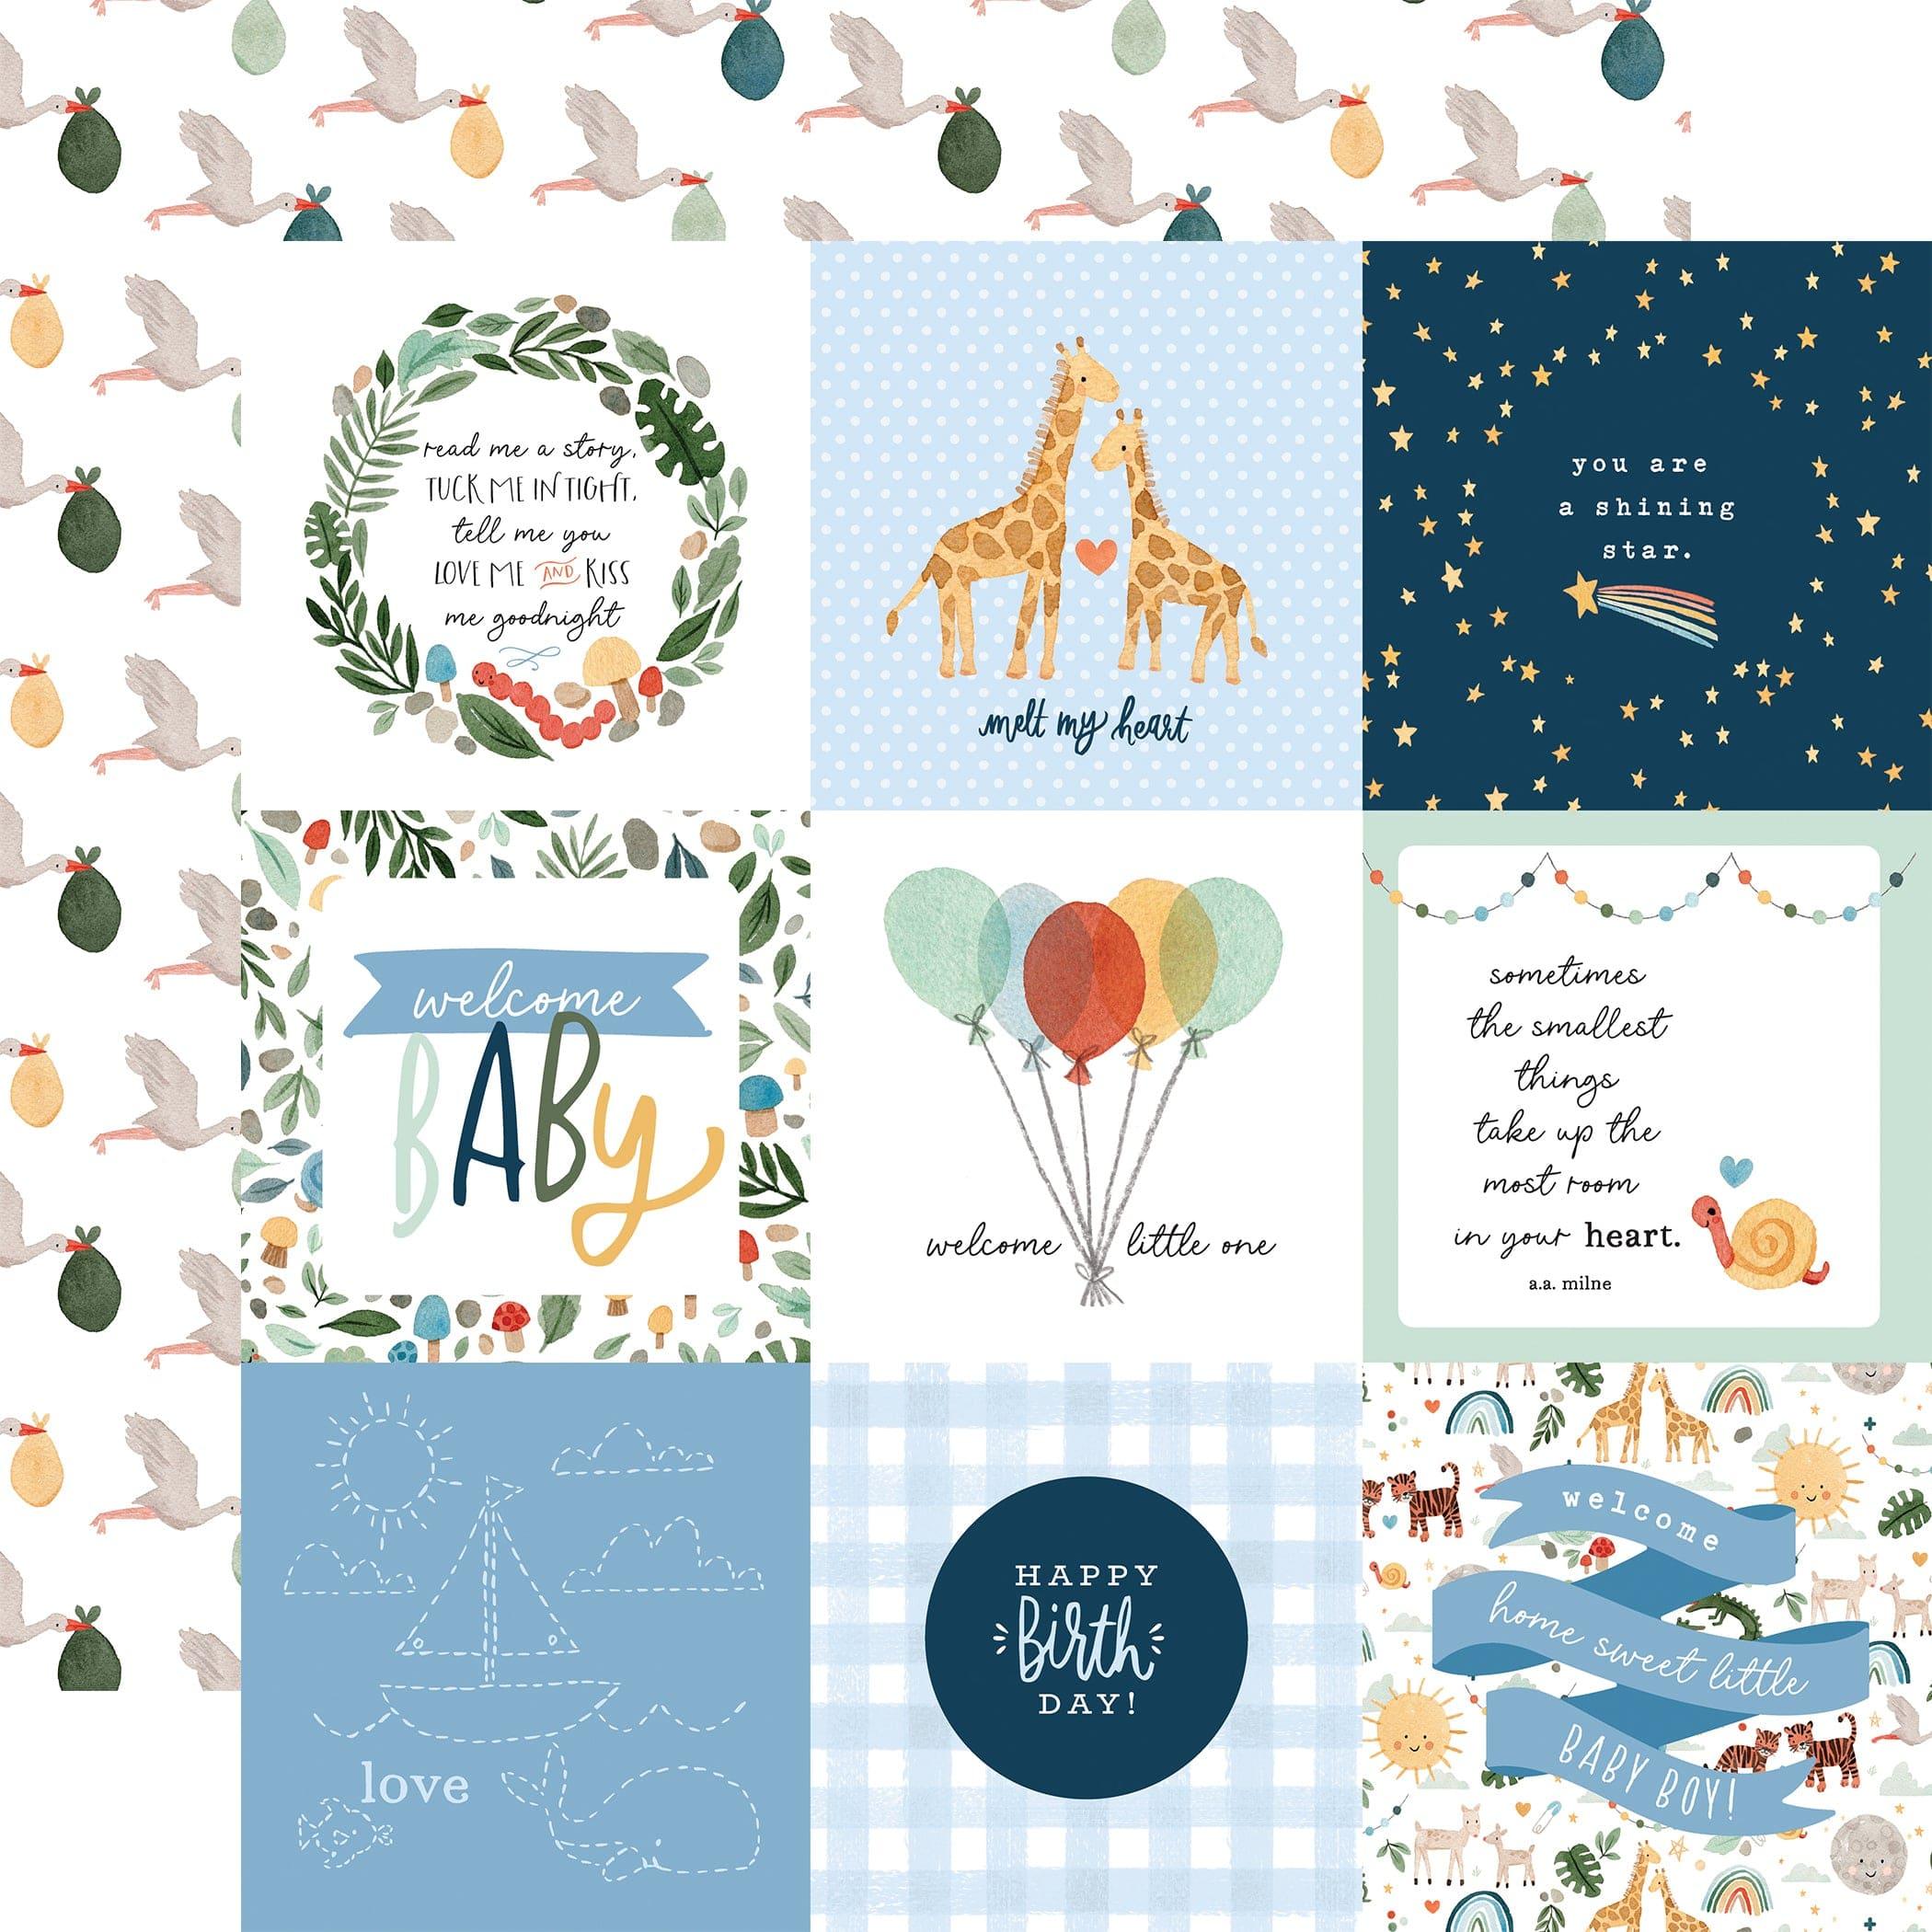 Welcome Baby Boy Collection 4 x 4 Journaling Cards 12 x 12 Double-Sided Scrapbook Paper by Echo Park Paper - Scrapbook Supply Companies